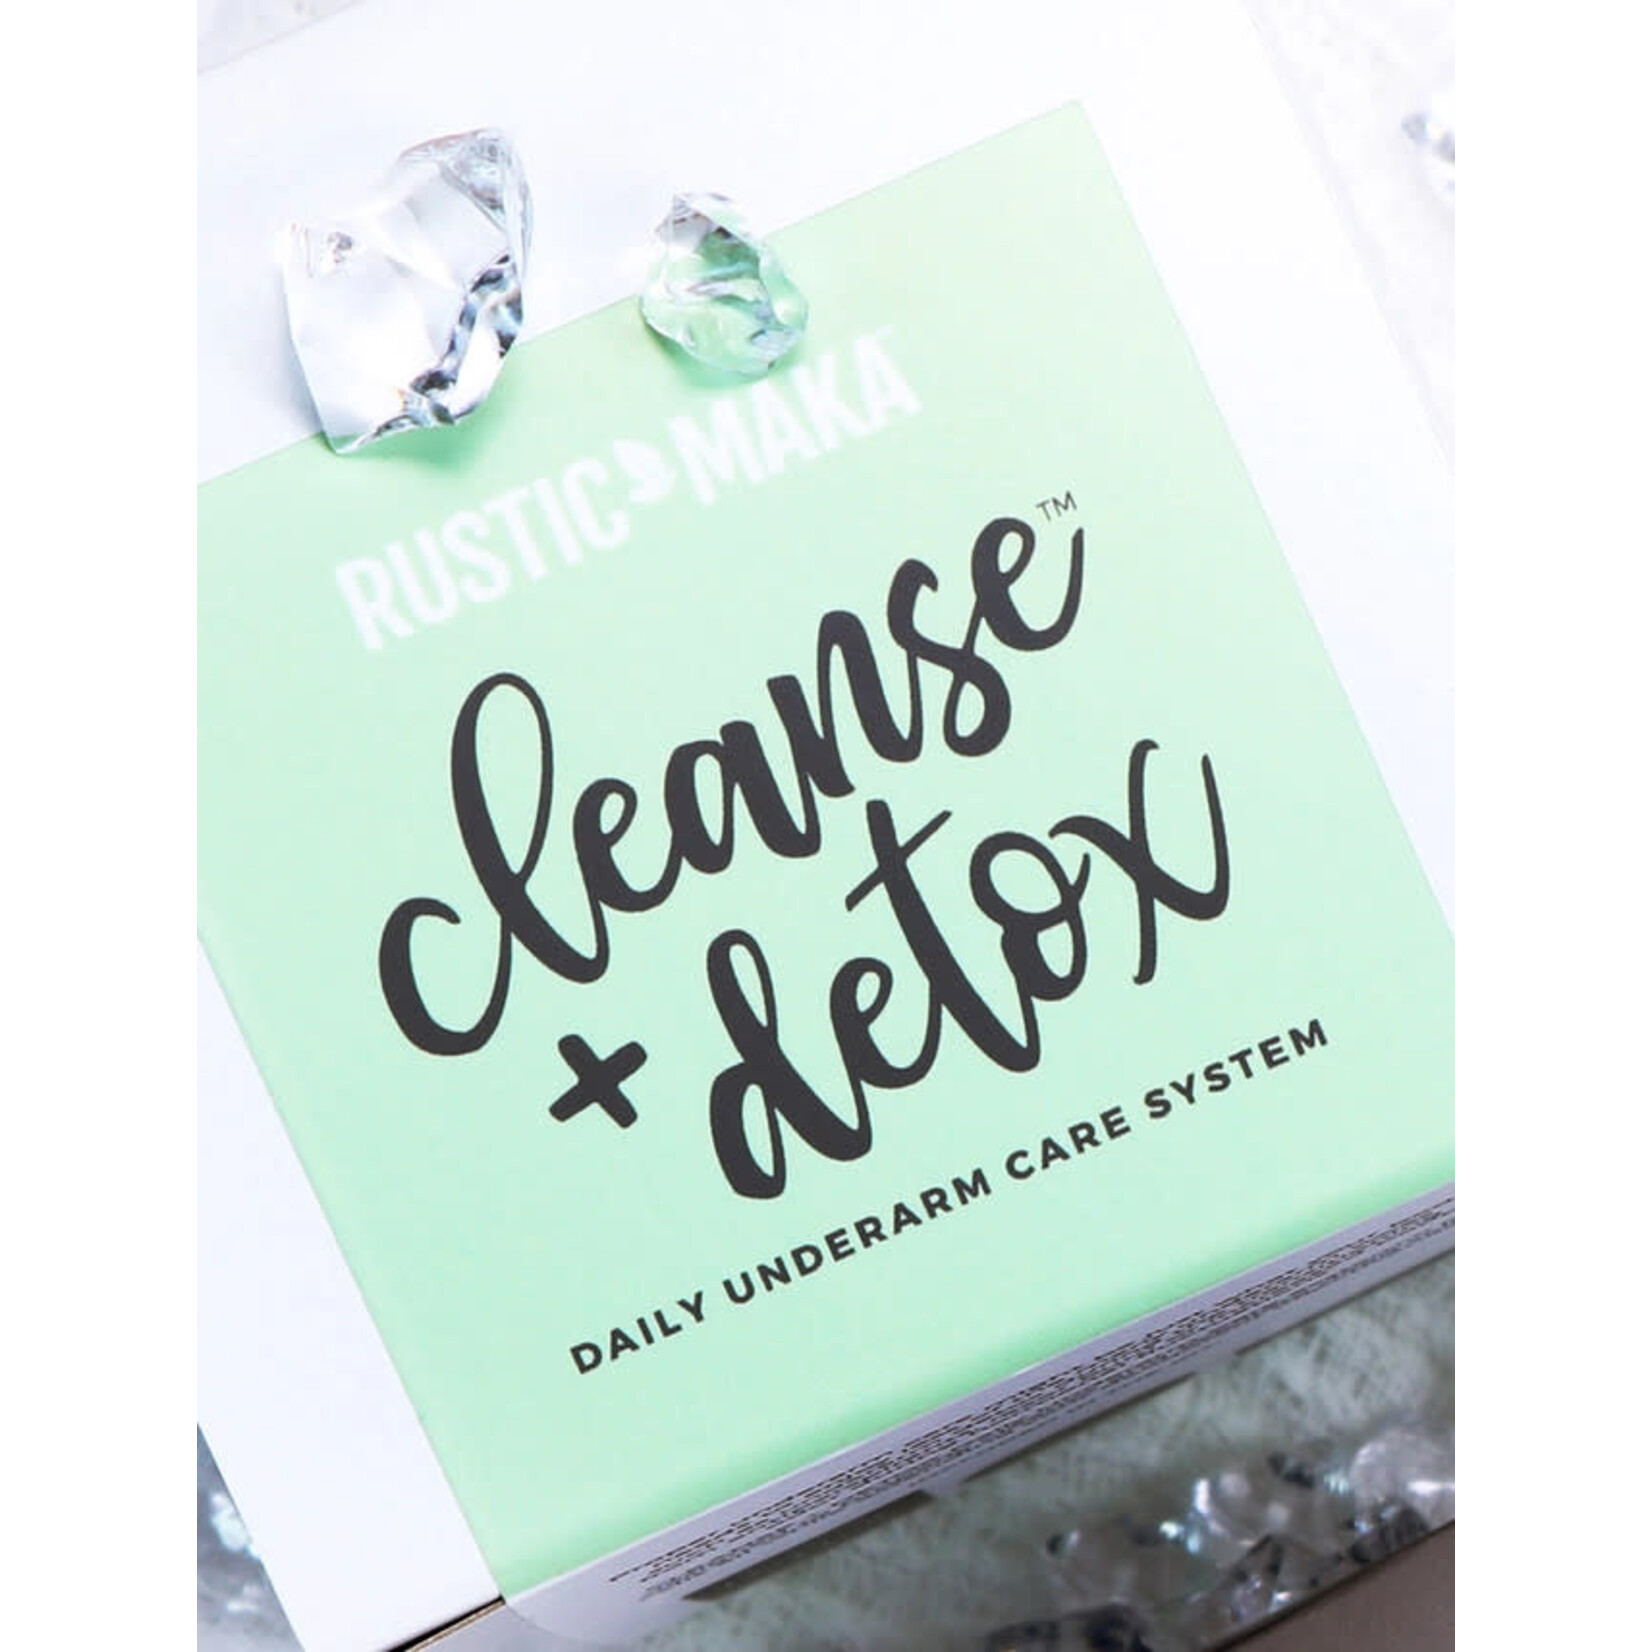 Rustic MAKA Cleanse + Detox Underarm Care System